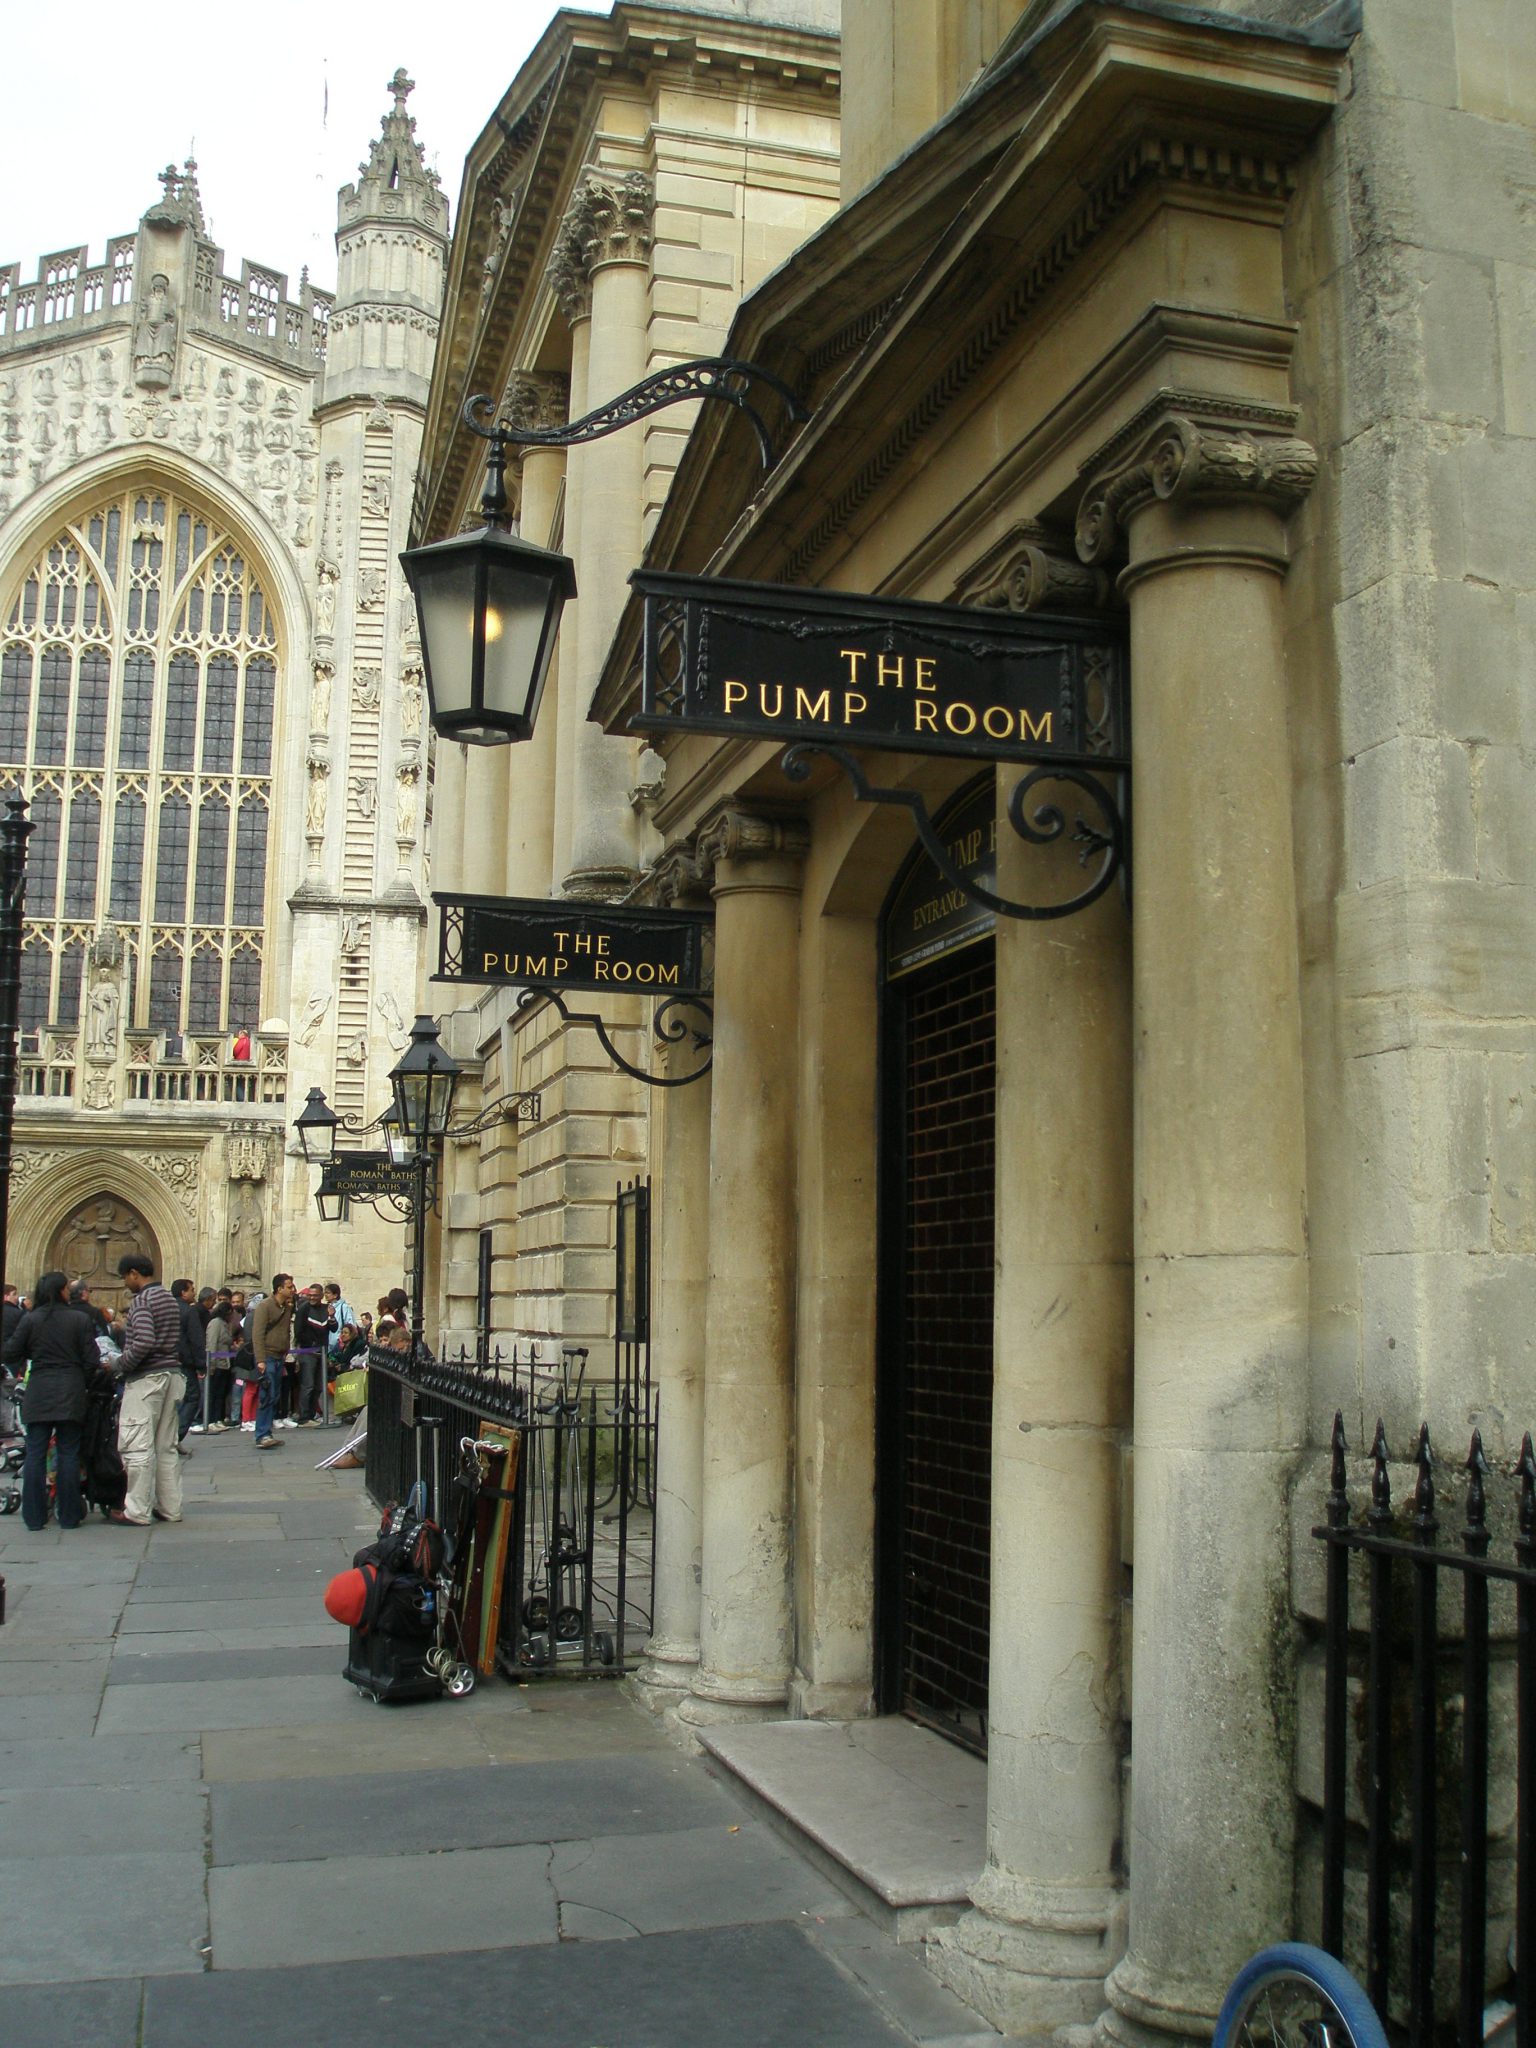 Entry to the Pump Room